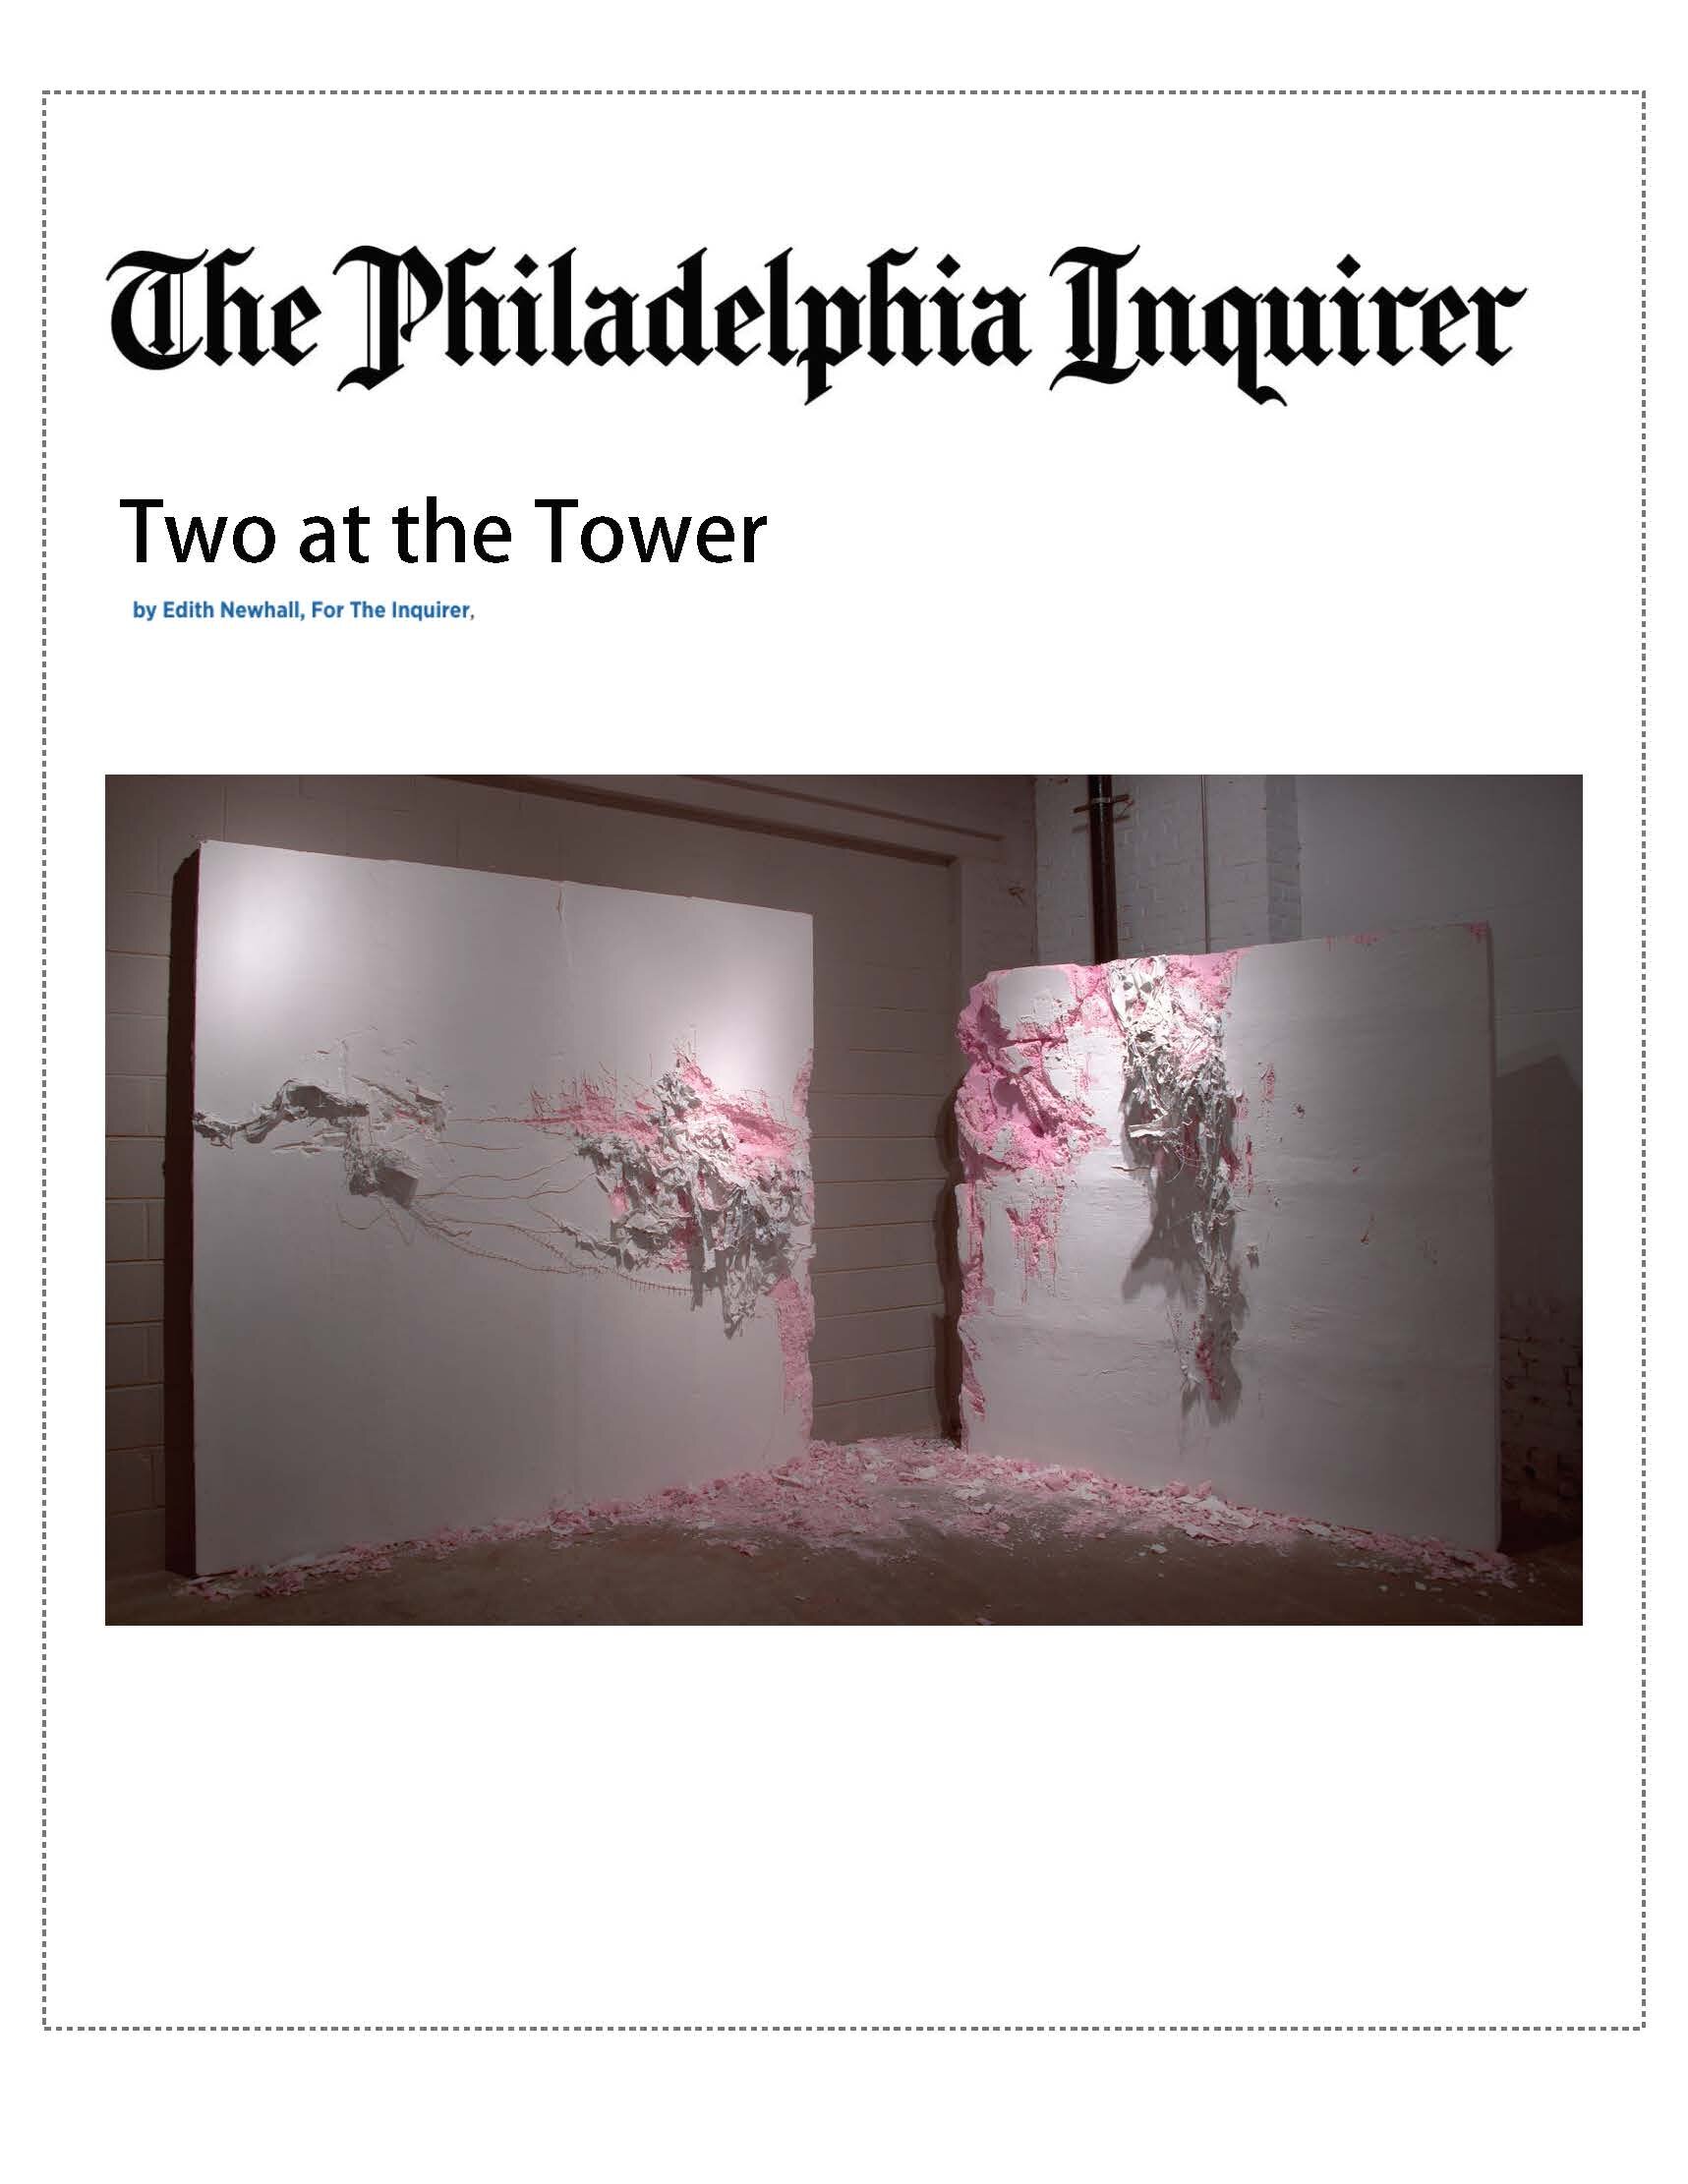 The Philadelphia_Two at the Tower_Page.jpg